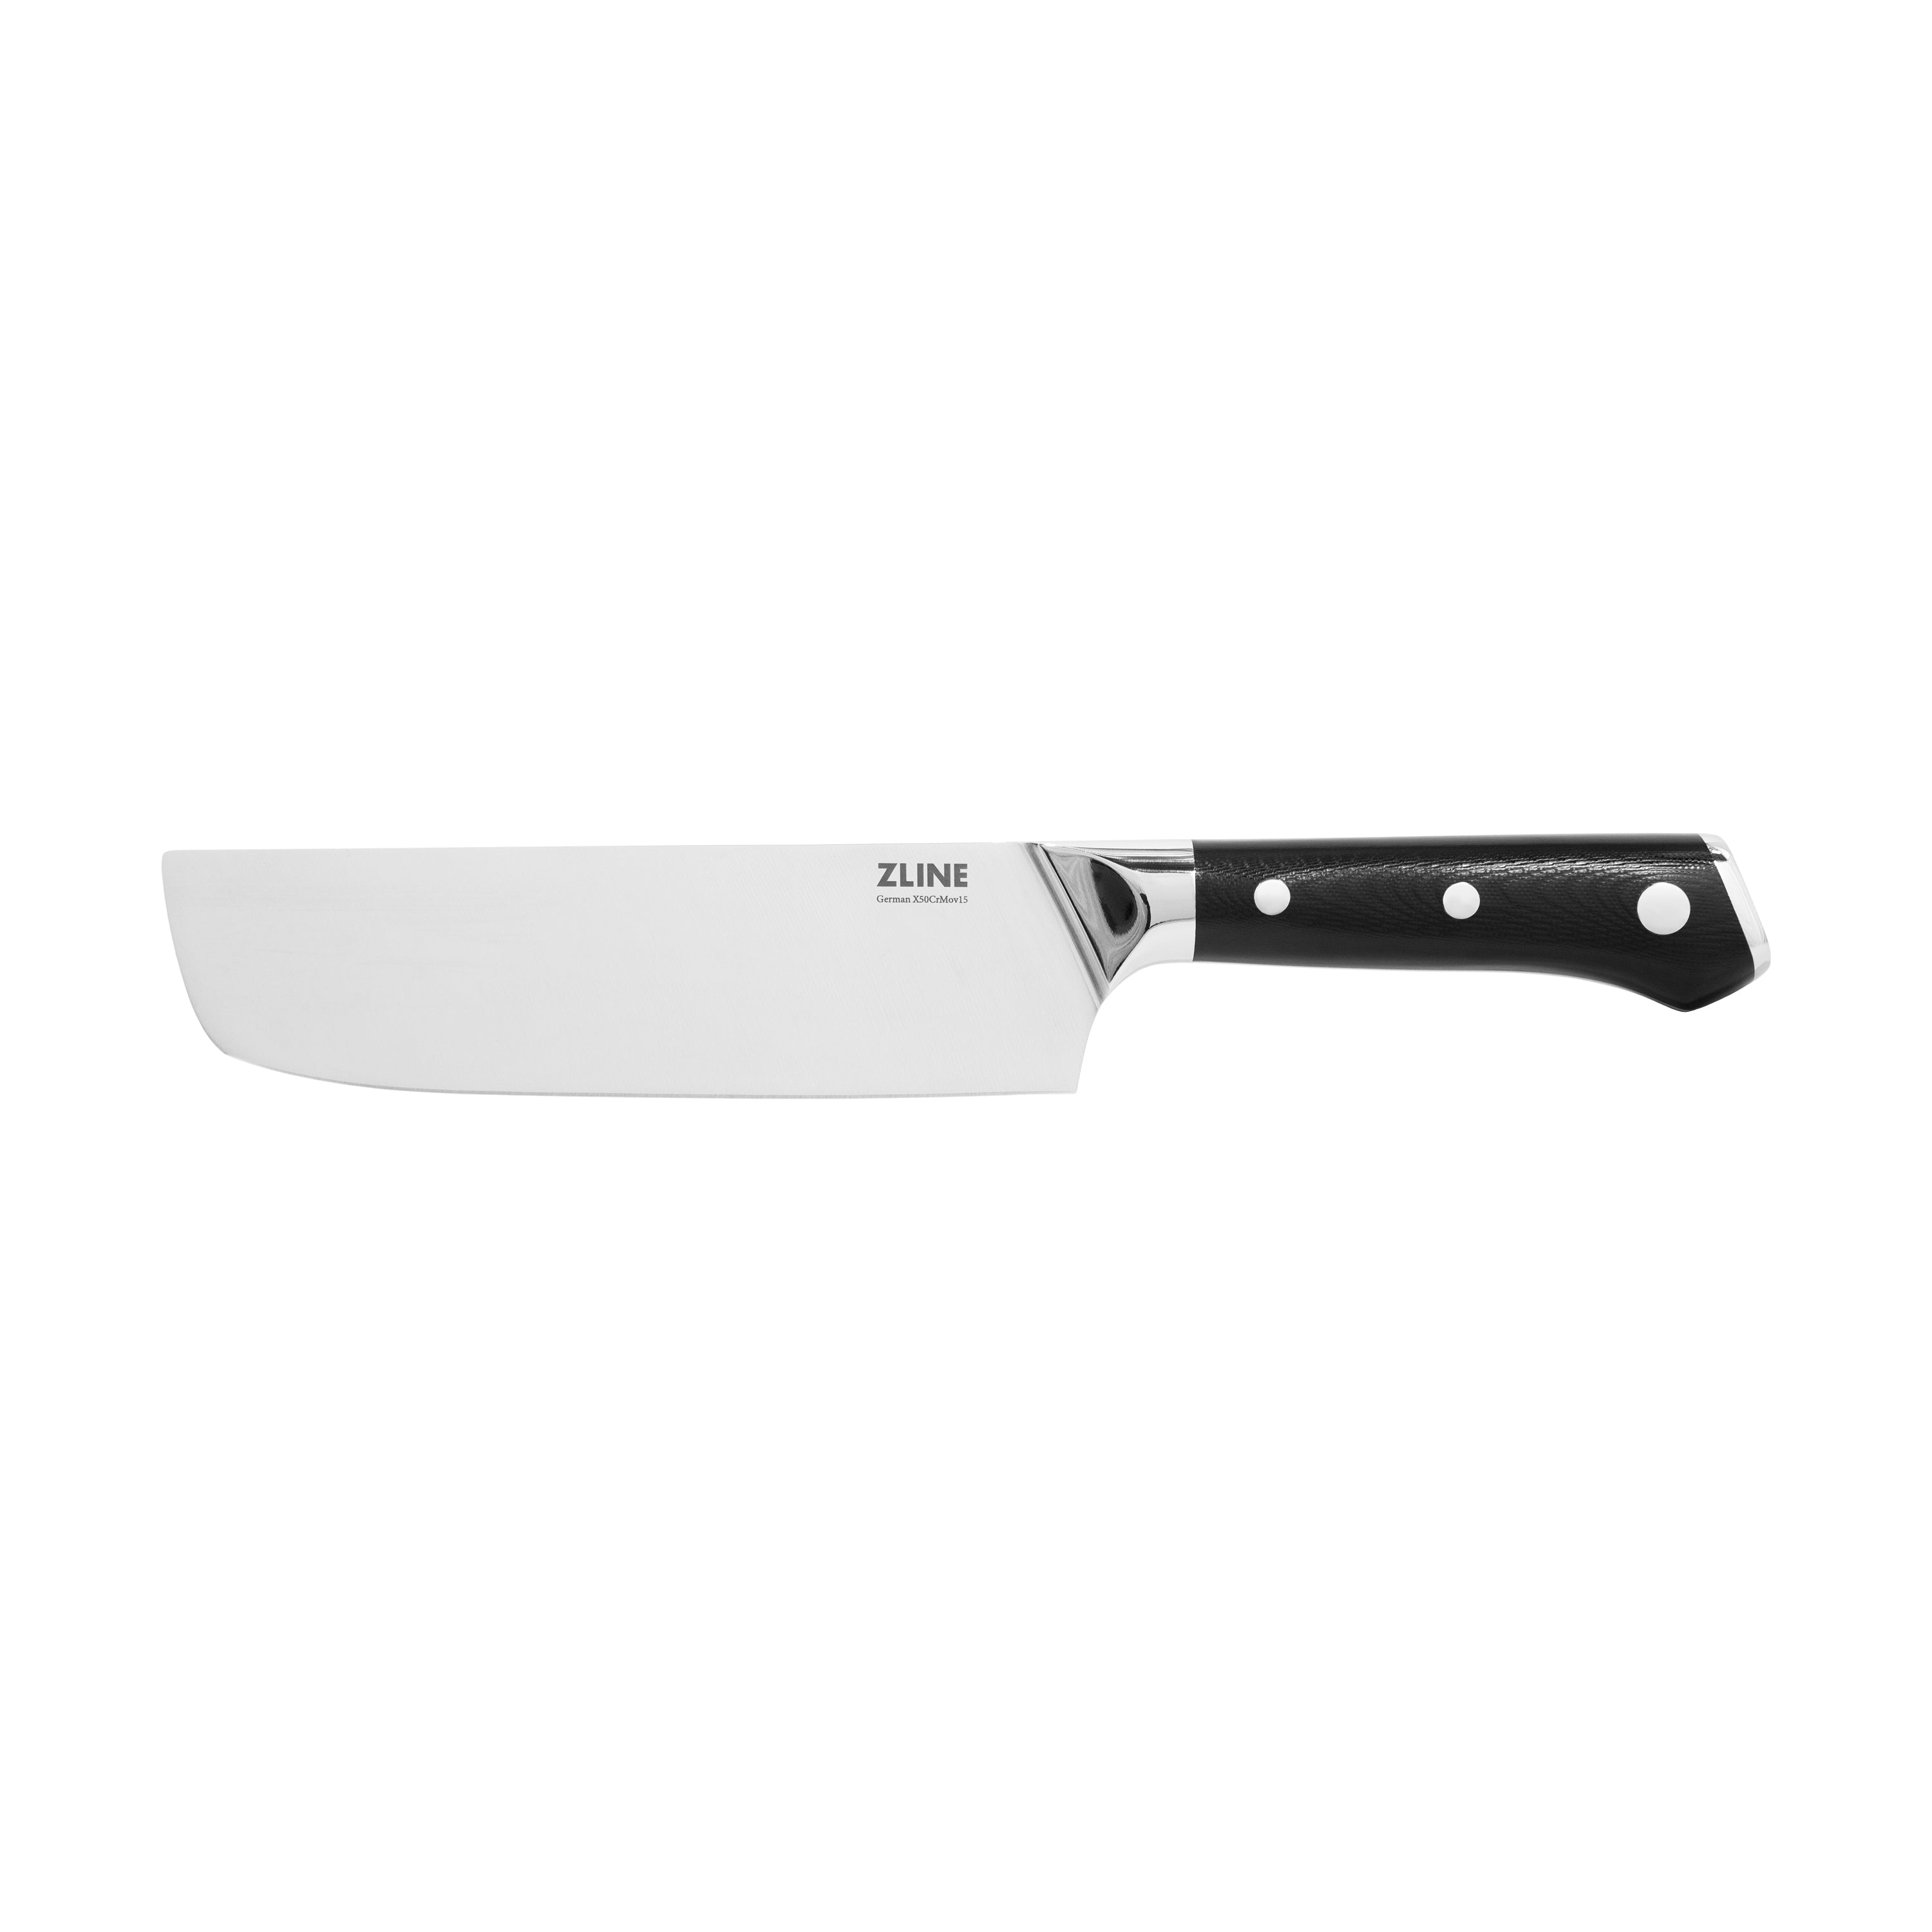 15 Piece Professional Chef Knife